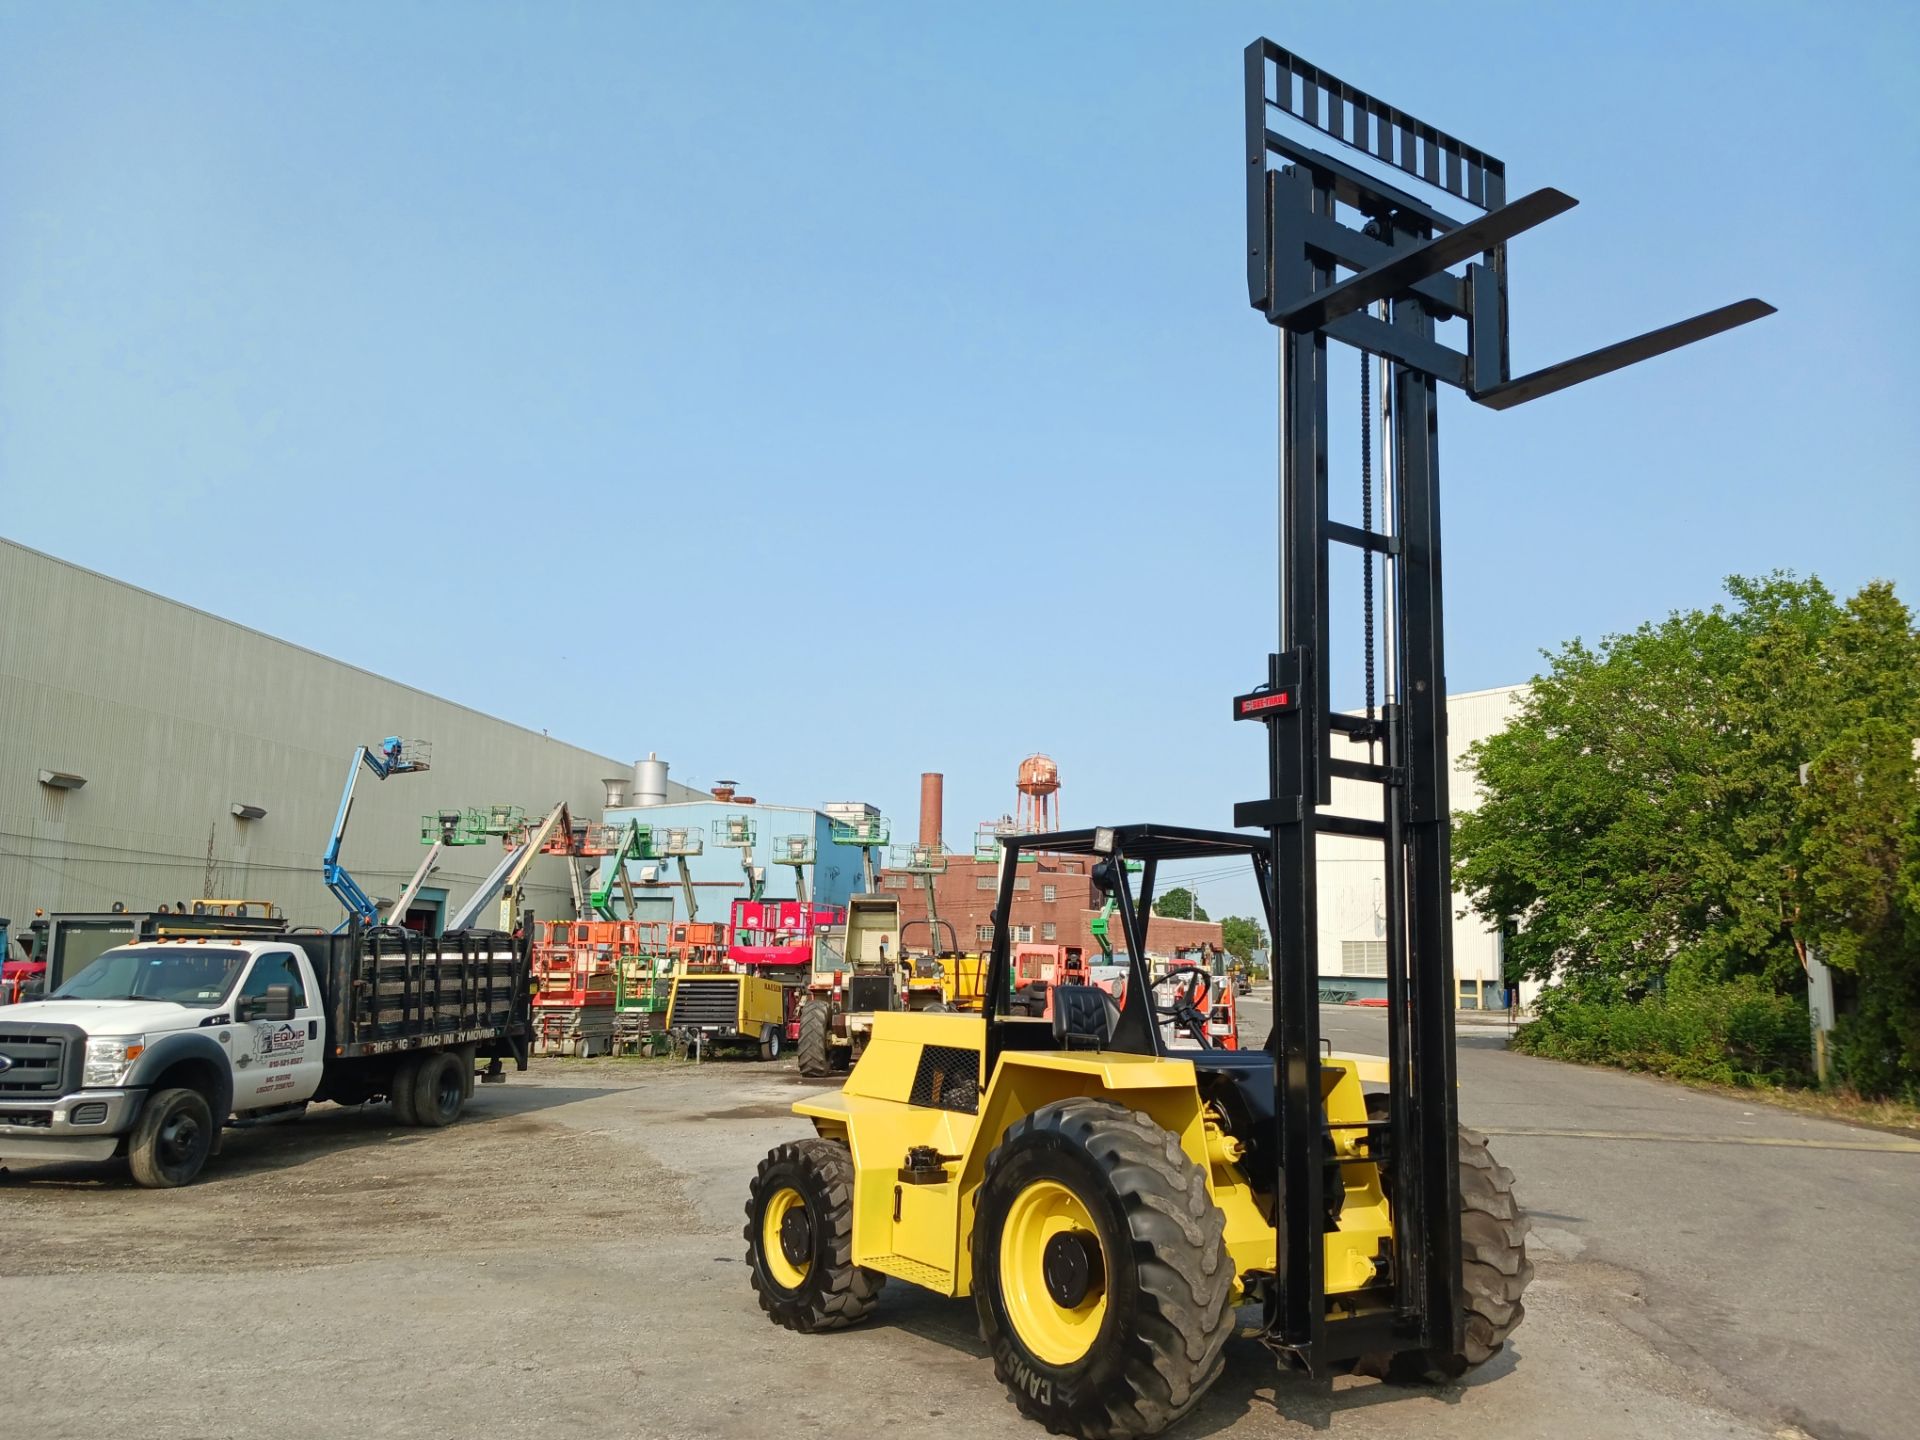 Sellick SD-80 8,000 lb Forklift - Lester, PA - Image 8 of 14